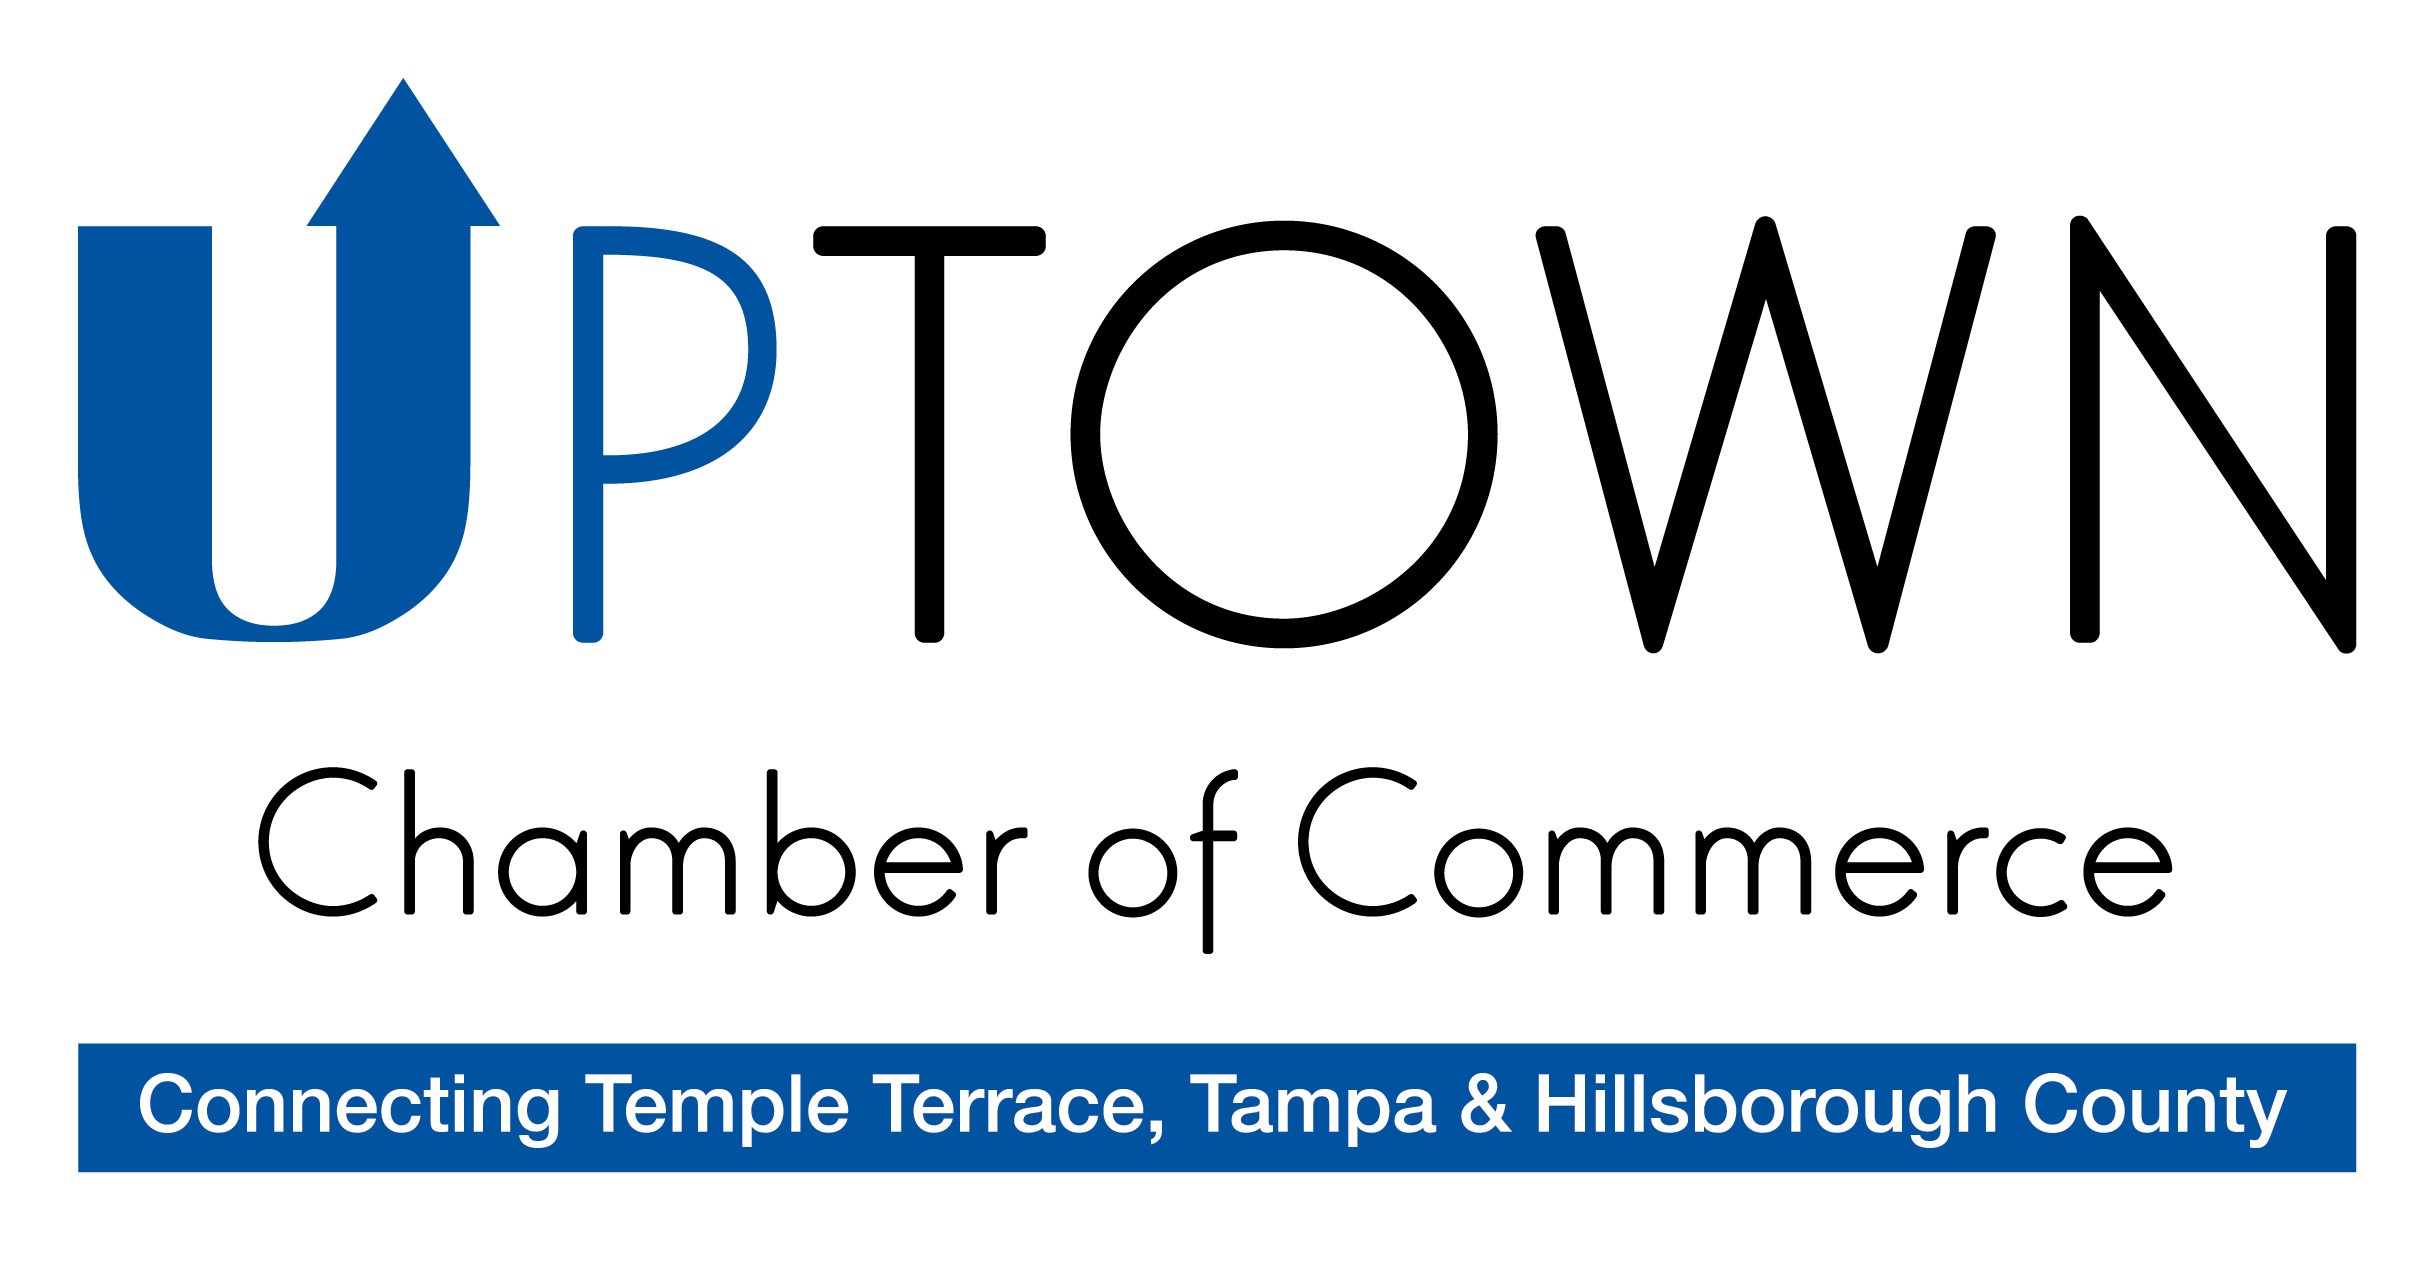 Temple Terrace Uptown Chamber of Commerce